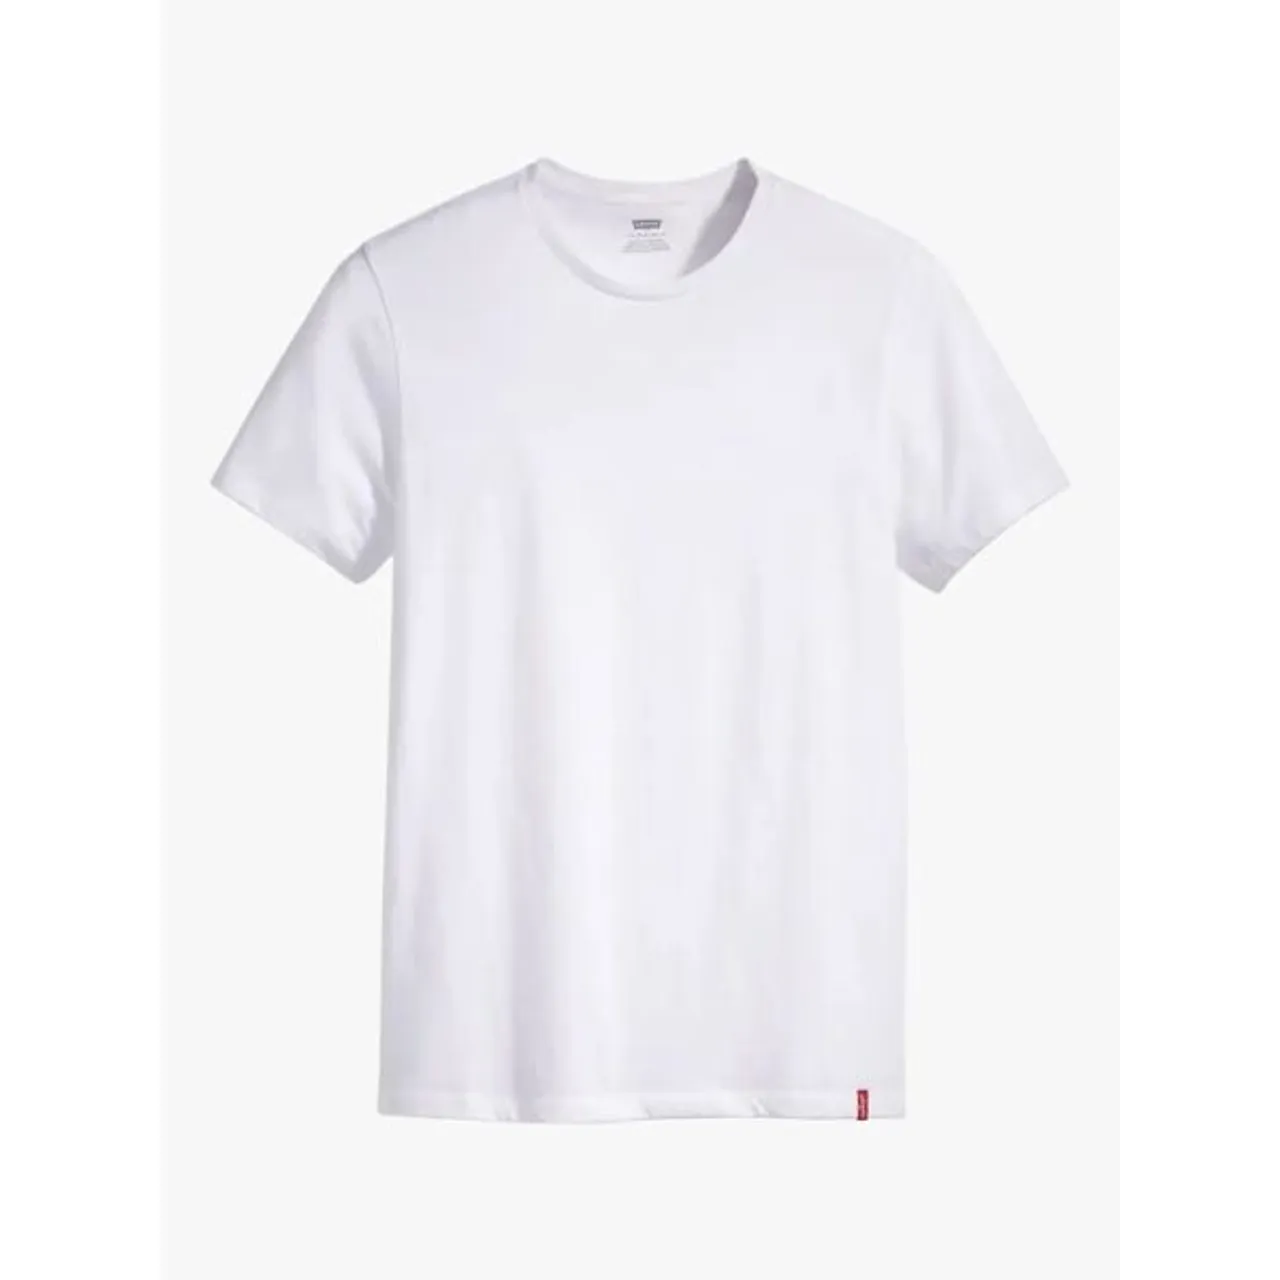 Levi's Slim Fit Crew Neck T-Shirt, Pack of 2 - White/Heather Grey - Male